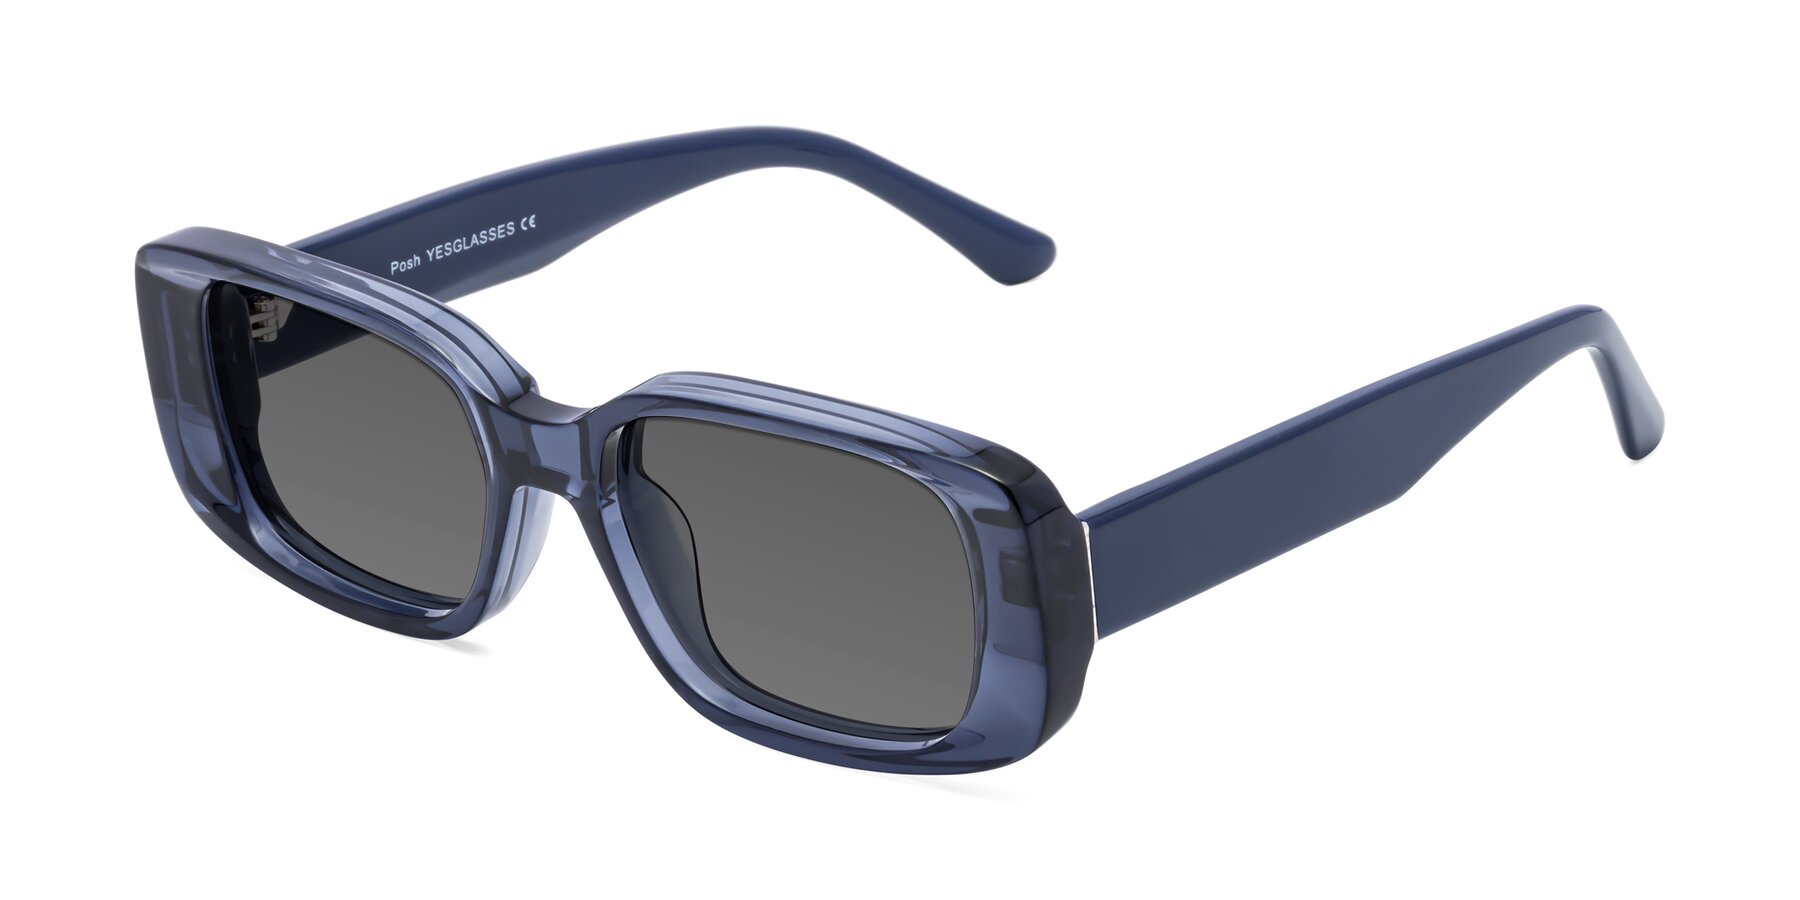 Angle of Posh in Translucent Blue with Medium Gray Tinted Lenses